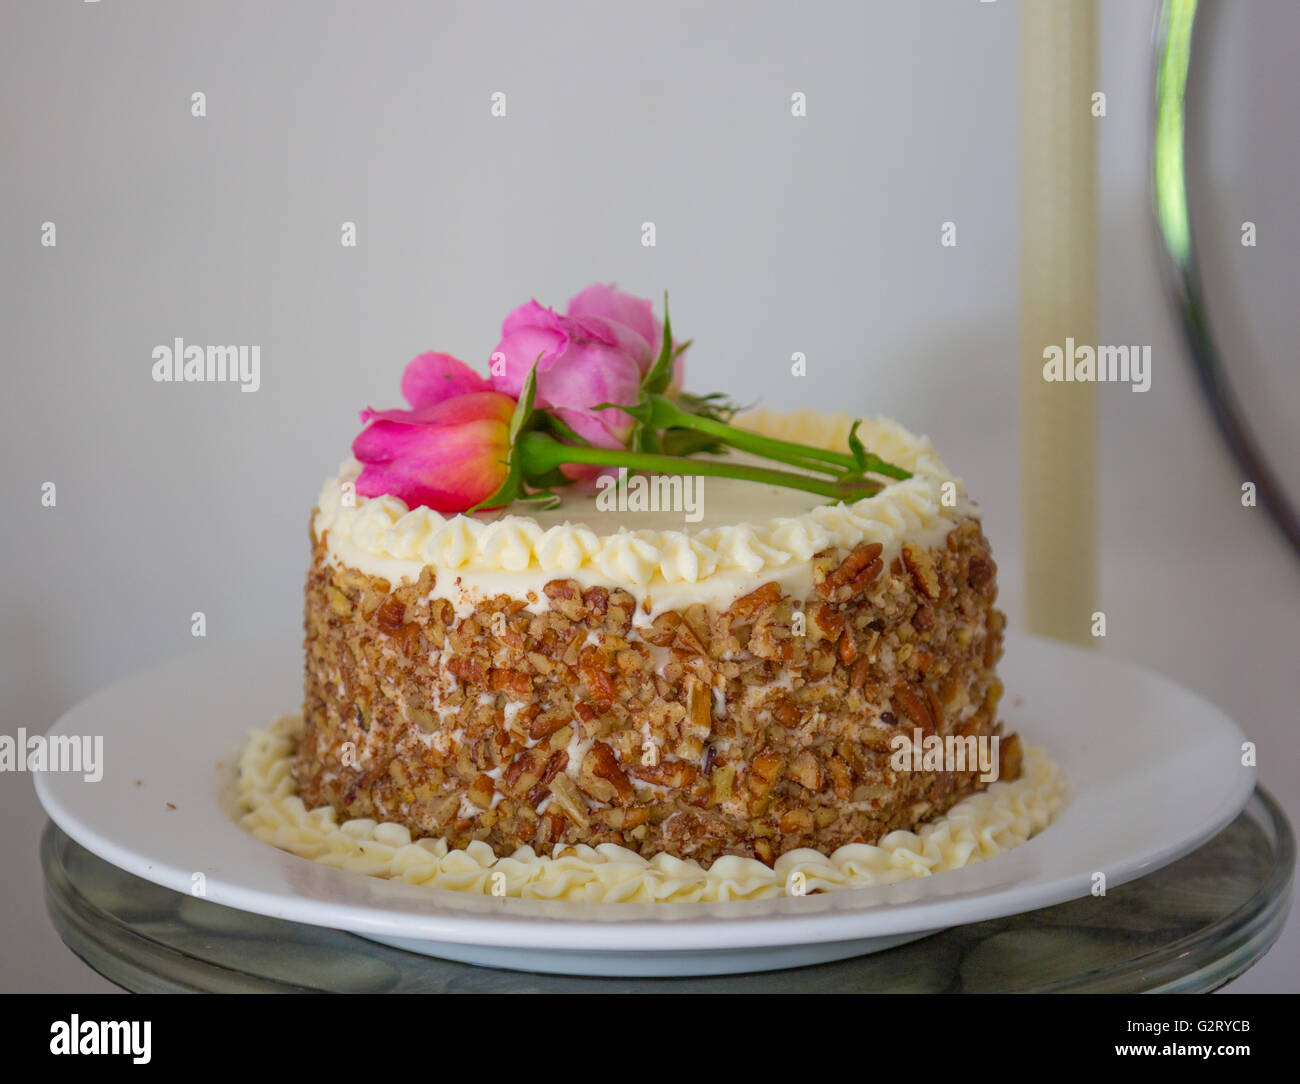 beautiful freshly made carrot cake with real pink roses on top Stock Photo